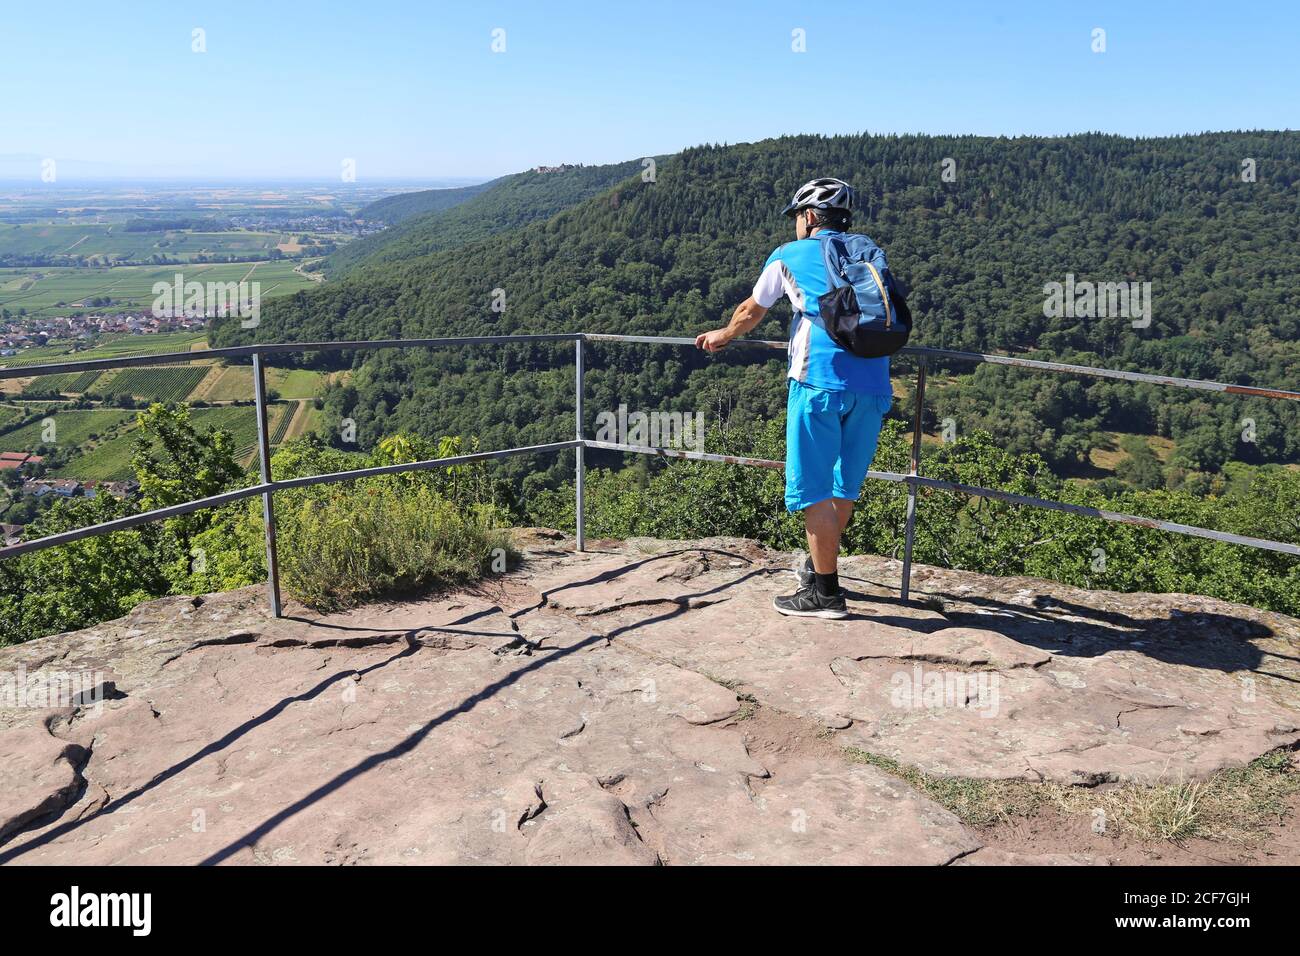 Mountain biker on the viewing platform of the Neukastel castle ruins above Leinsweiler, Palatinate Forest, Germany (Model released) Stock Photo